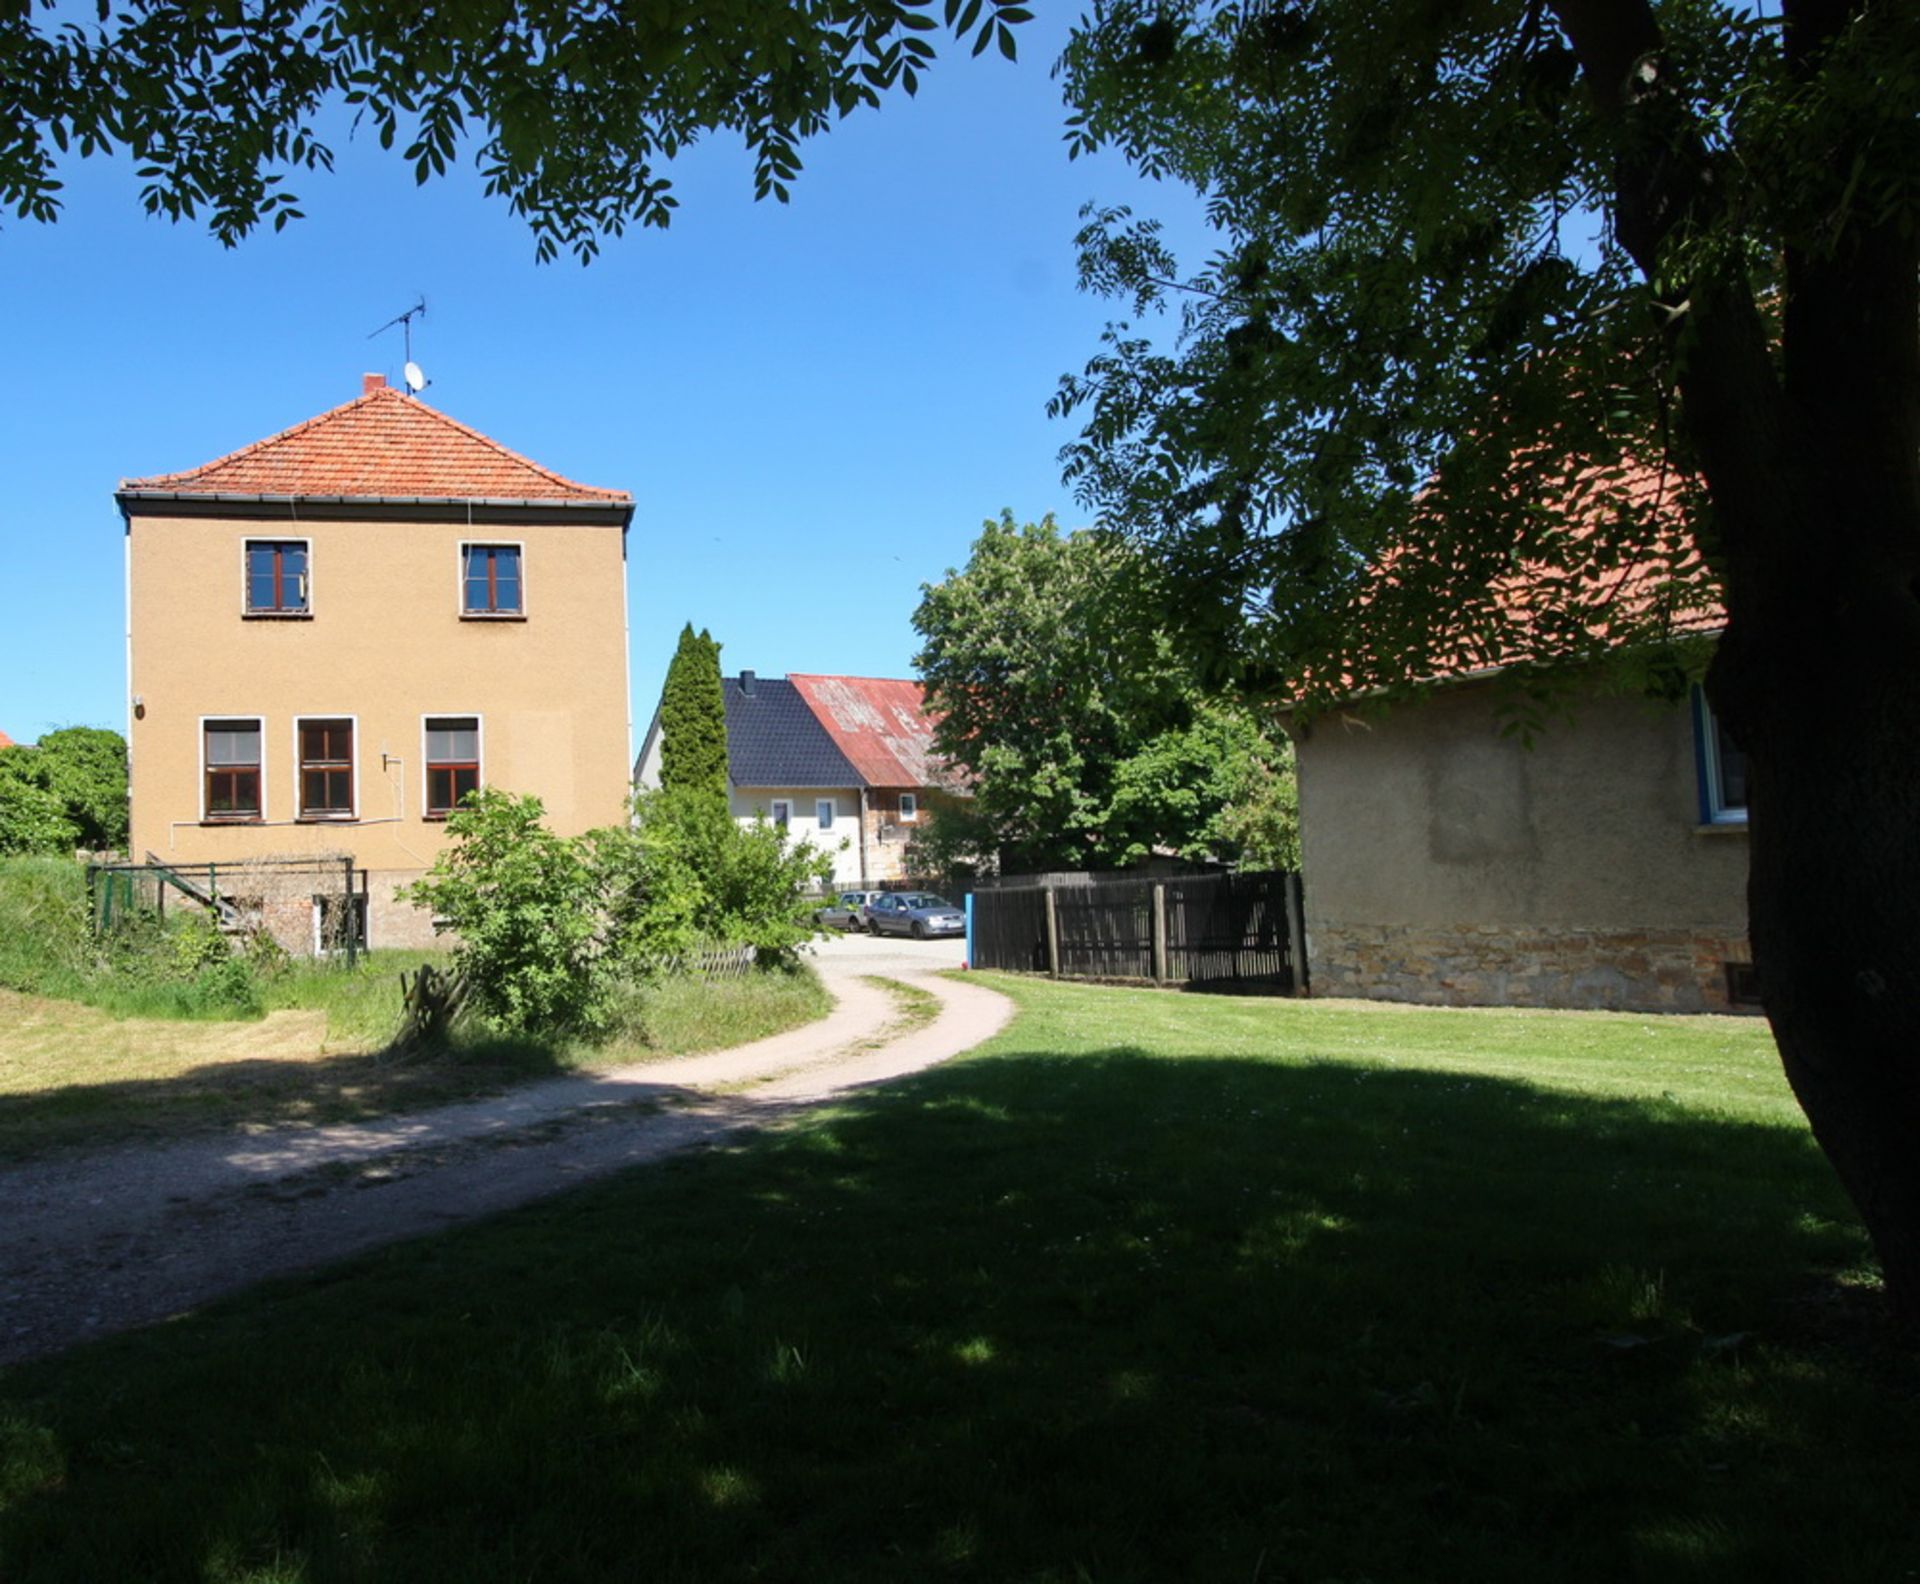 LARGE HOUSING BLOCK HORNSOMMEM, GERMANY READY TO MOVE INTO FREEHOLD VACANT POSSESSION - Image 67 of 91